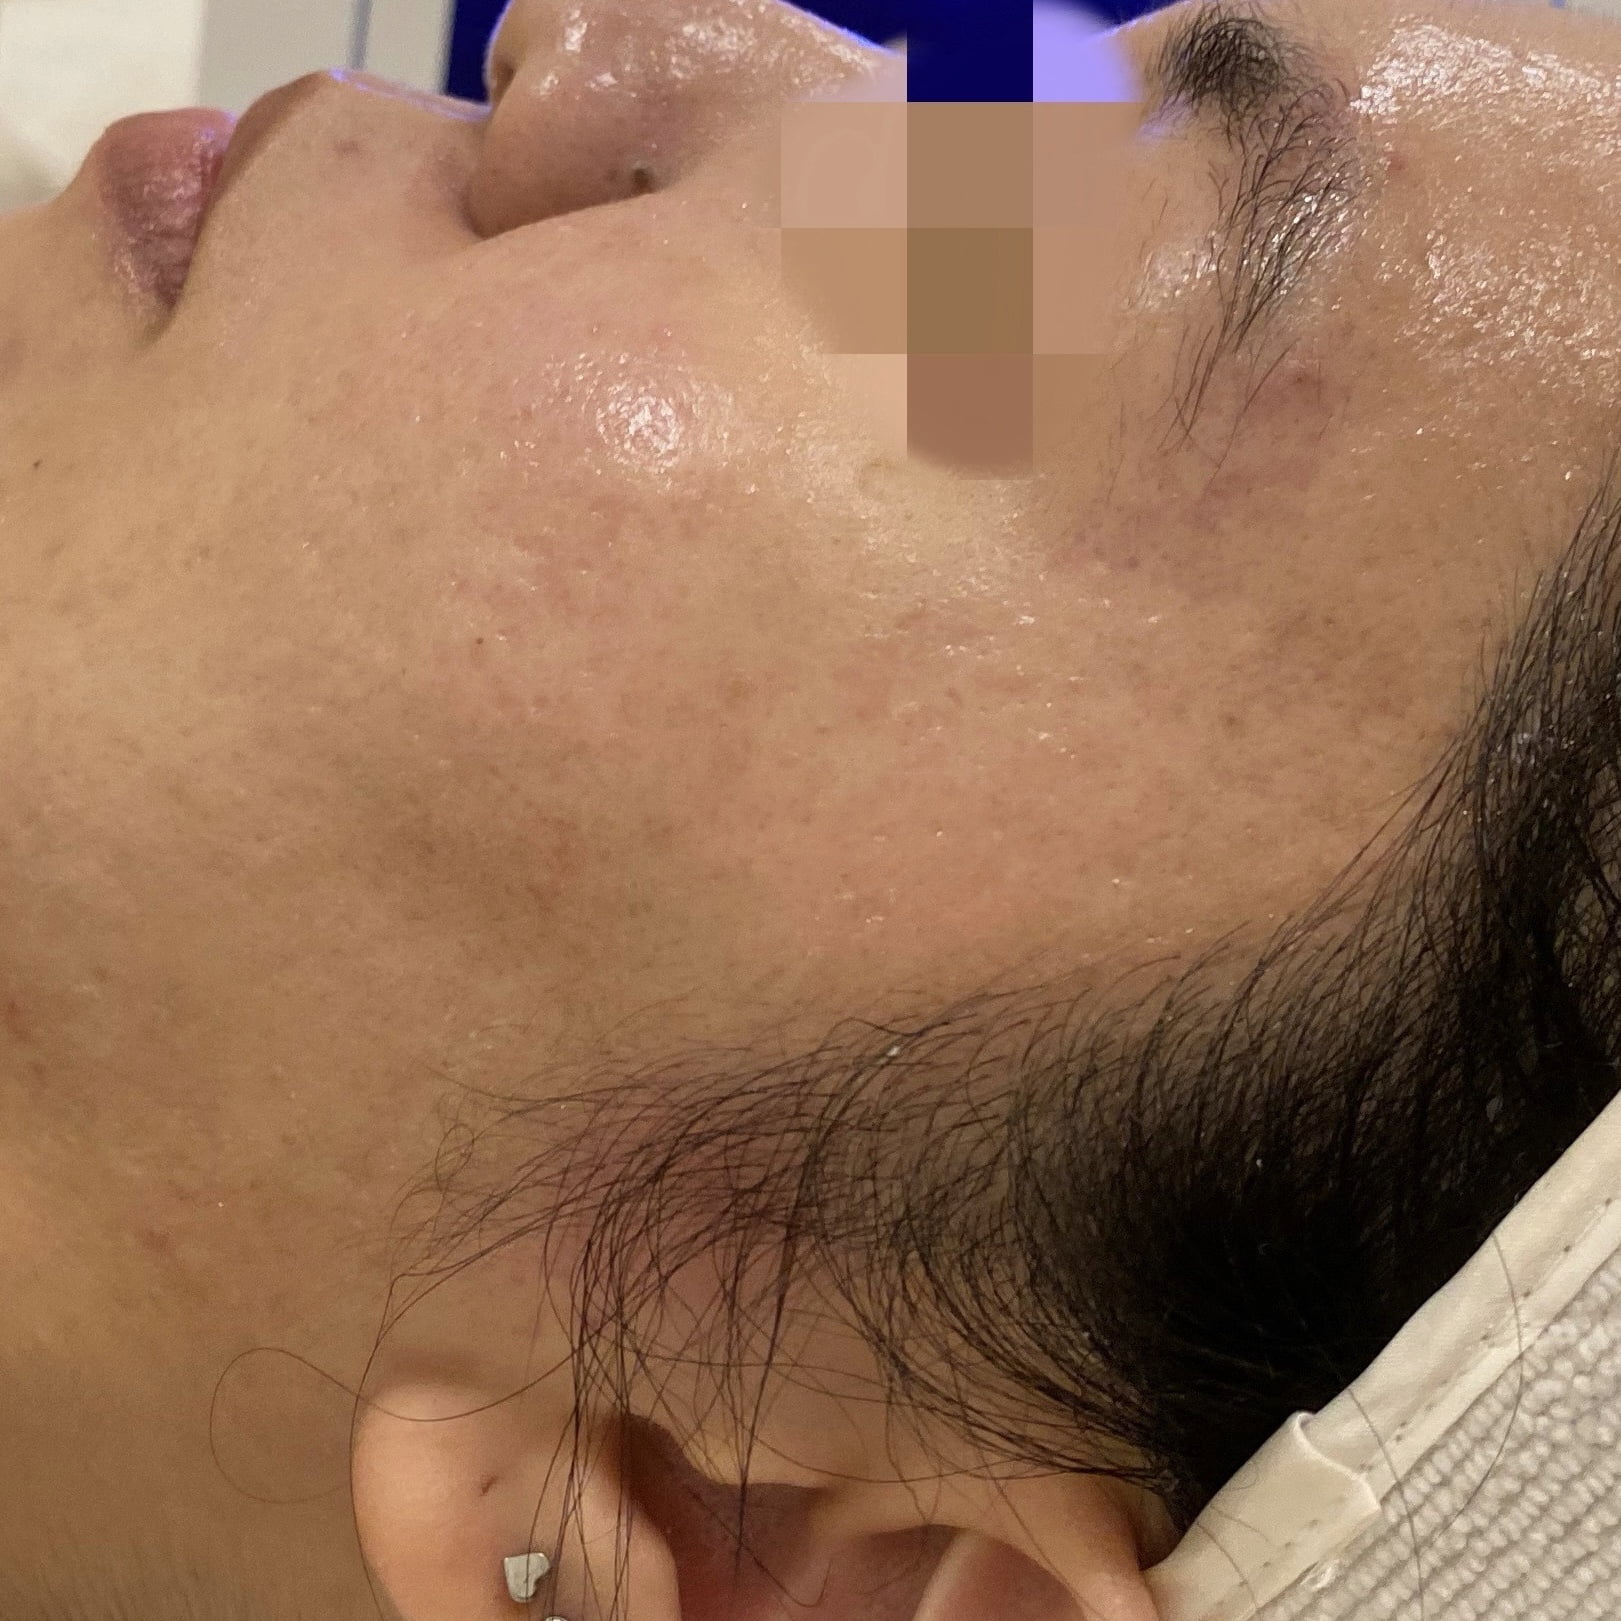 Client after 3 sessions of Venus Viva acne scar resurfacing.